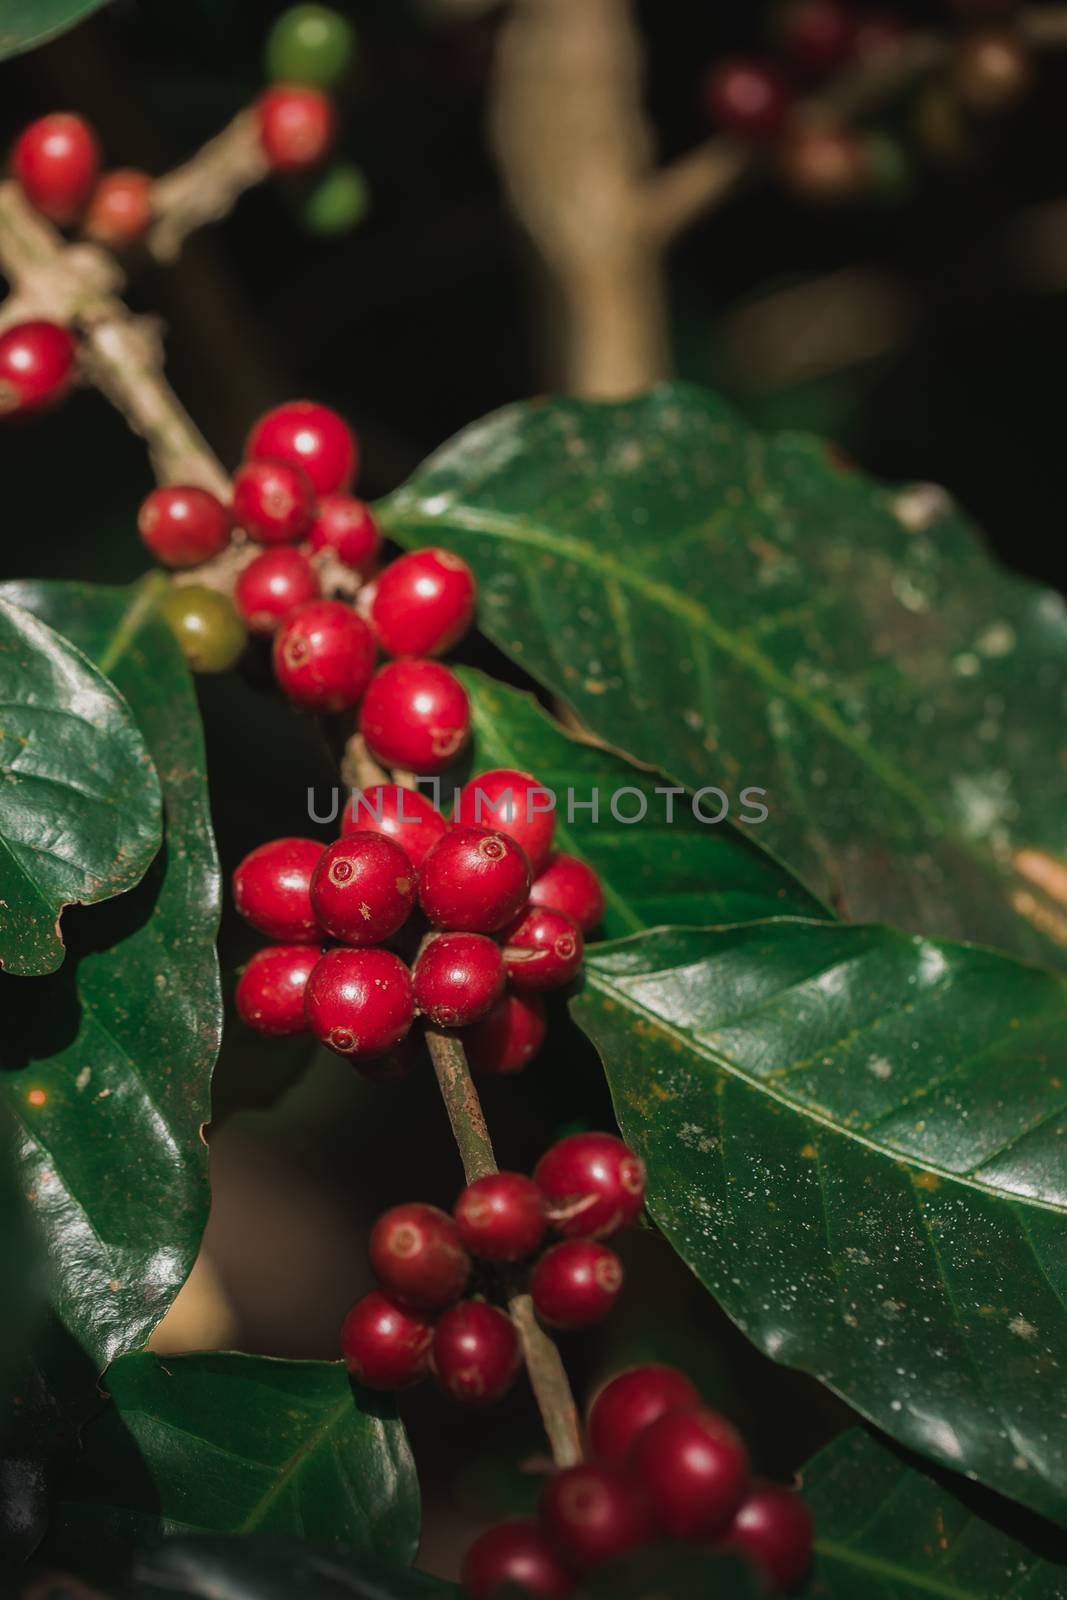 Coffee beans ripening on tree in North of thailand by freedomnaruk